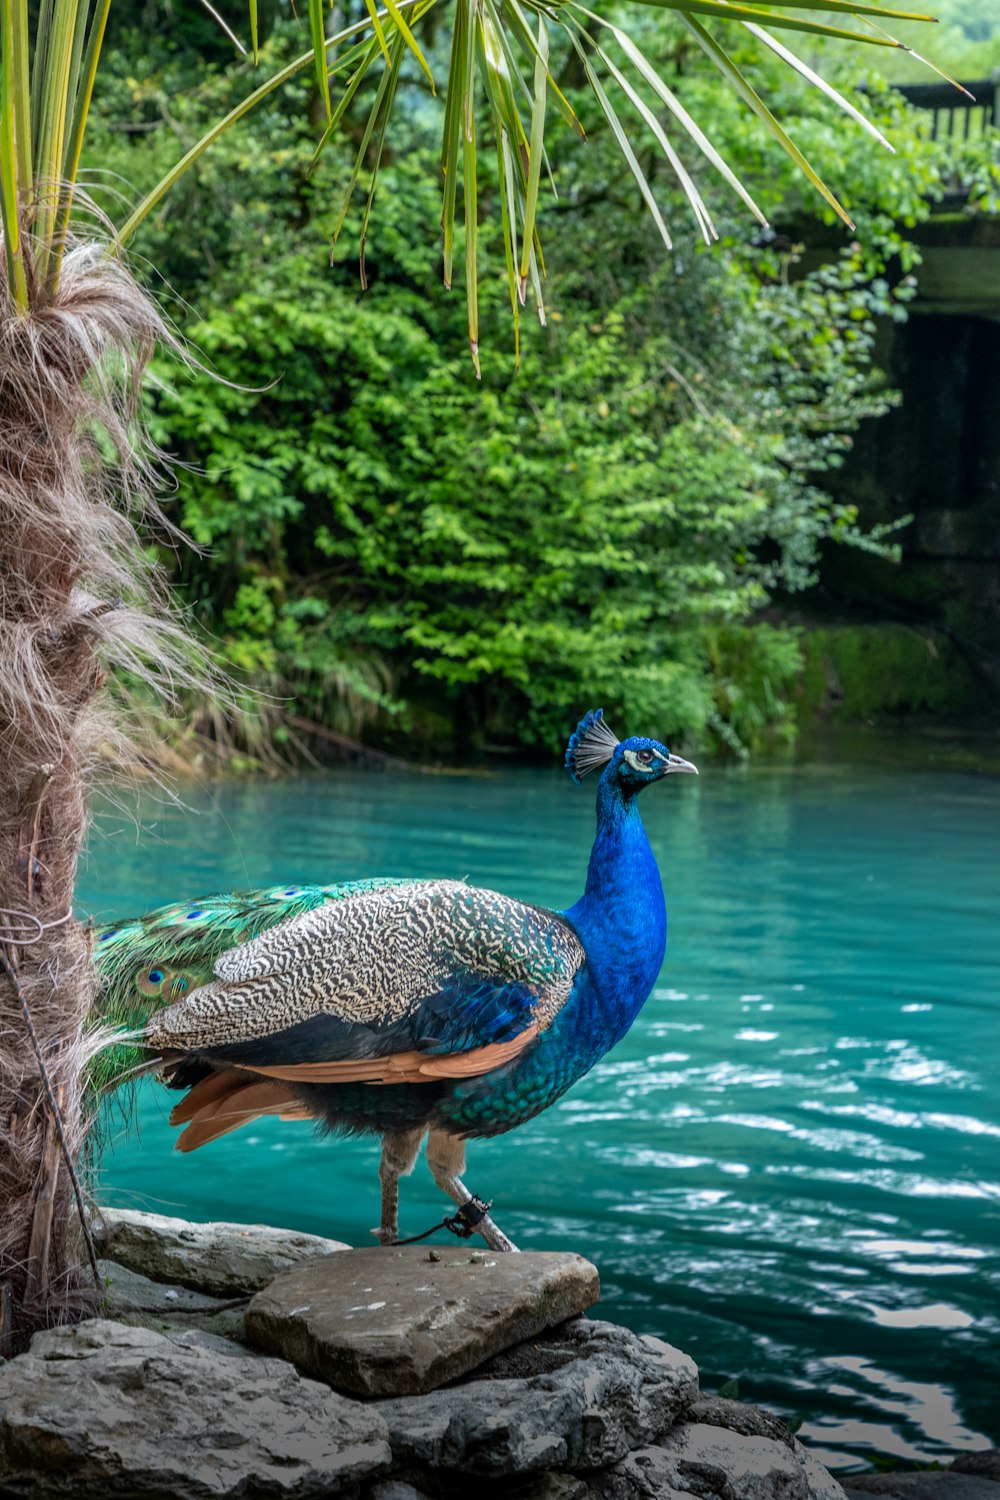 a peacock standing on a rock next to a body of water